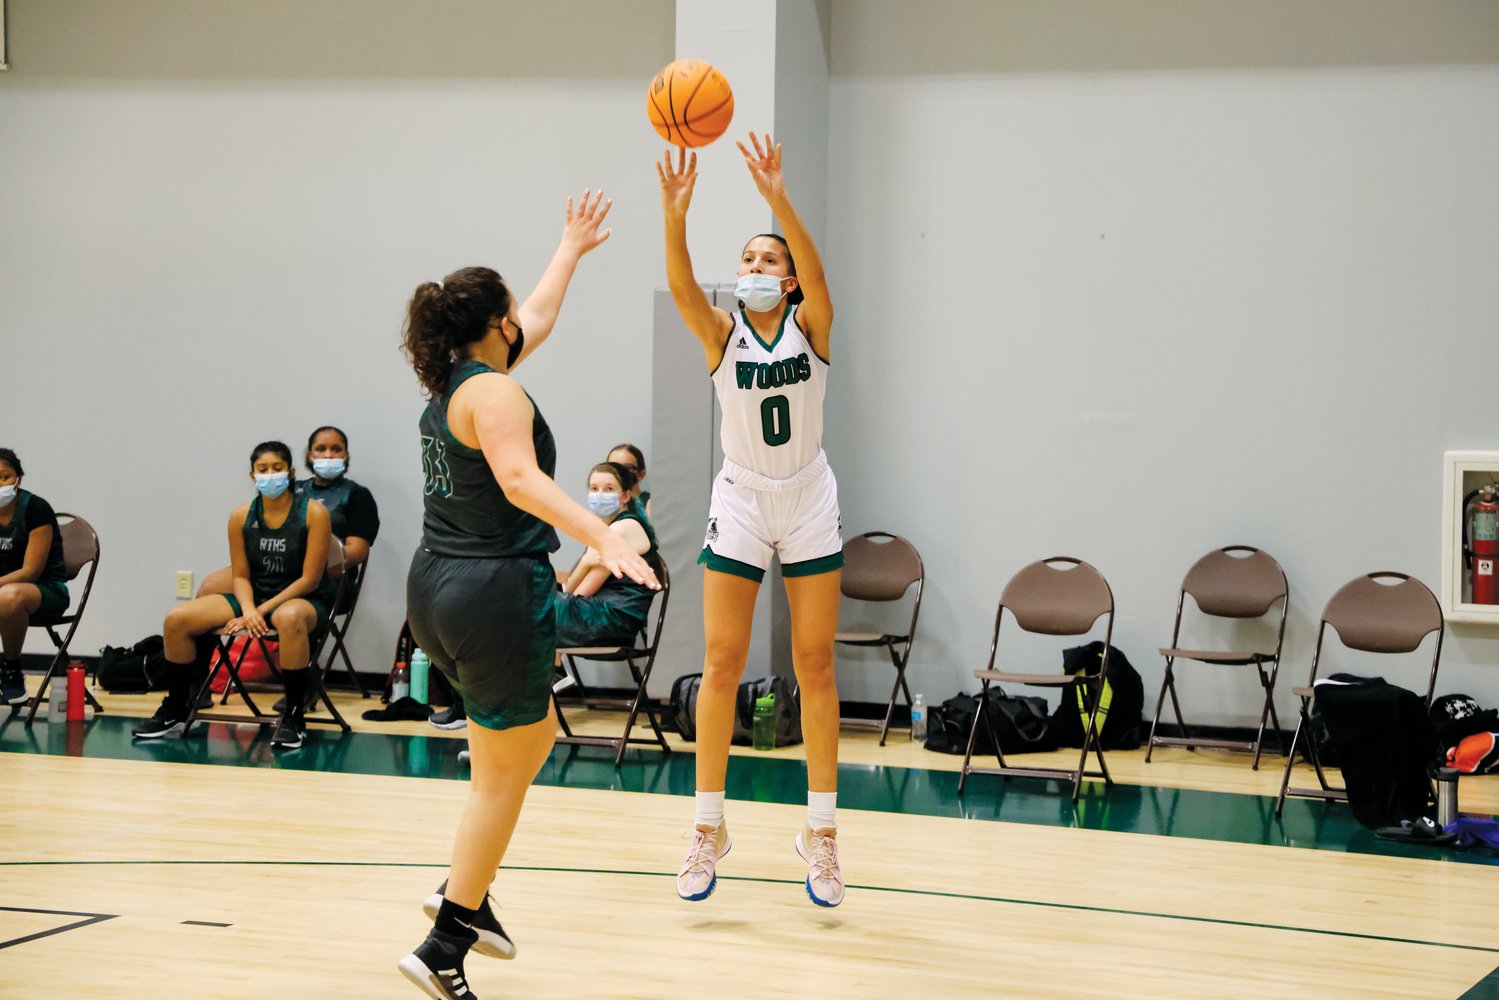 Woods Charter sophomore Lexi Smollen (0) shoots a jumper in the Wolves' 53-11 win over Research Triangle in Chapel Hill last Friday. Smollen is the team's leading scorer on the season, averaging 15.3 points per game.